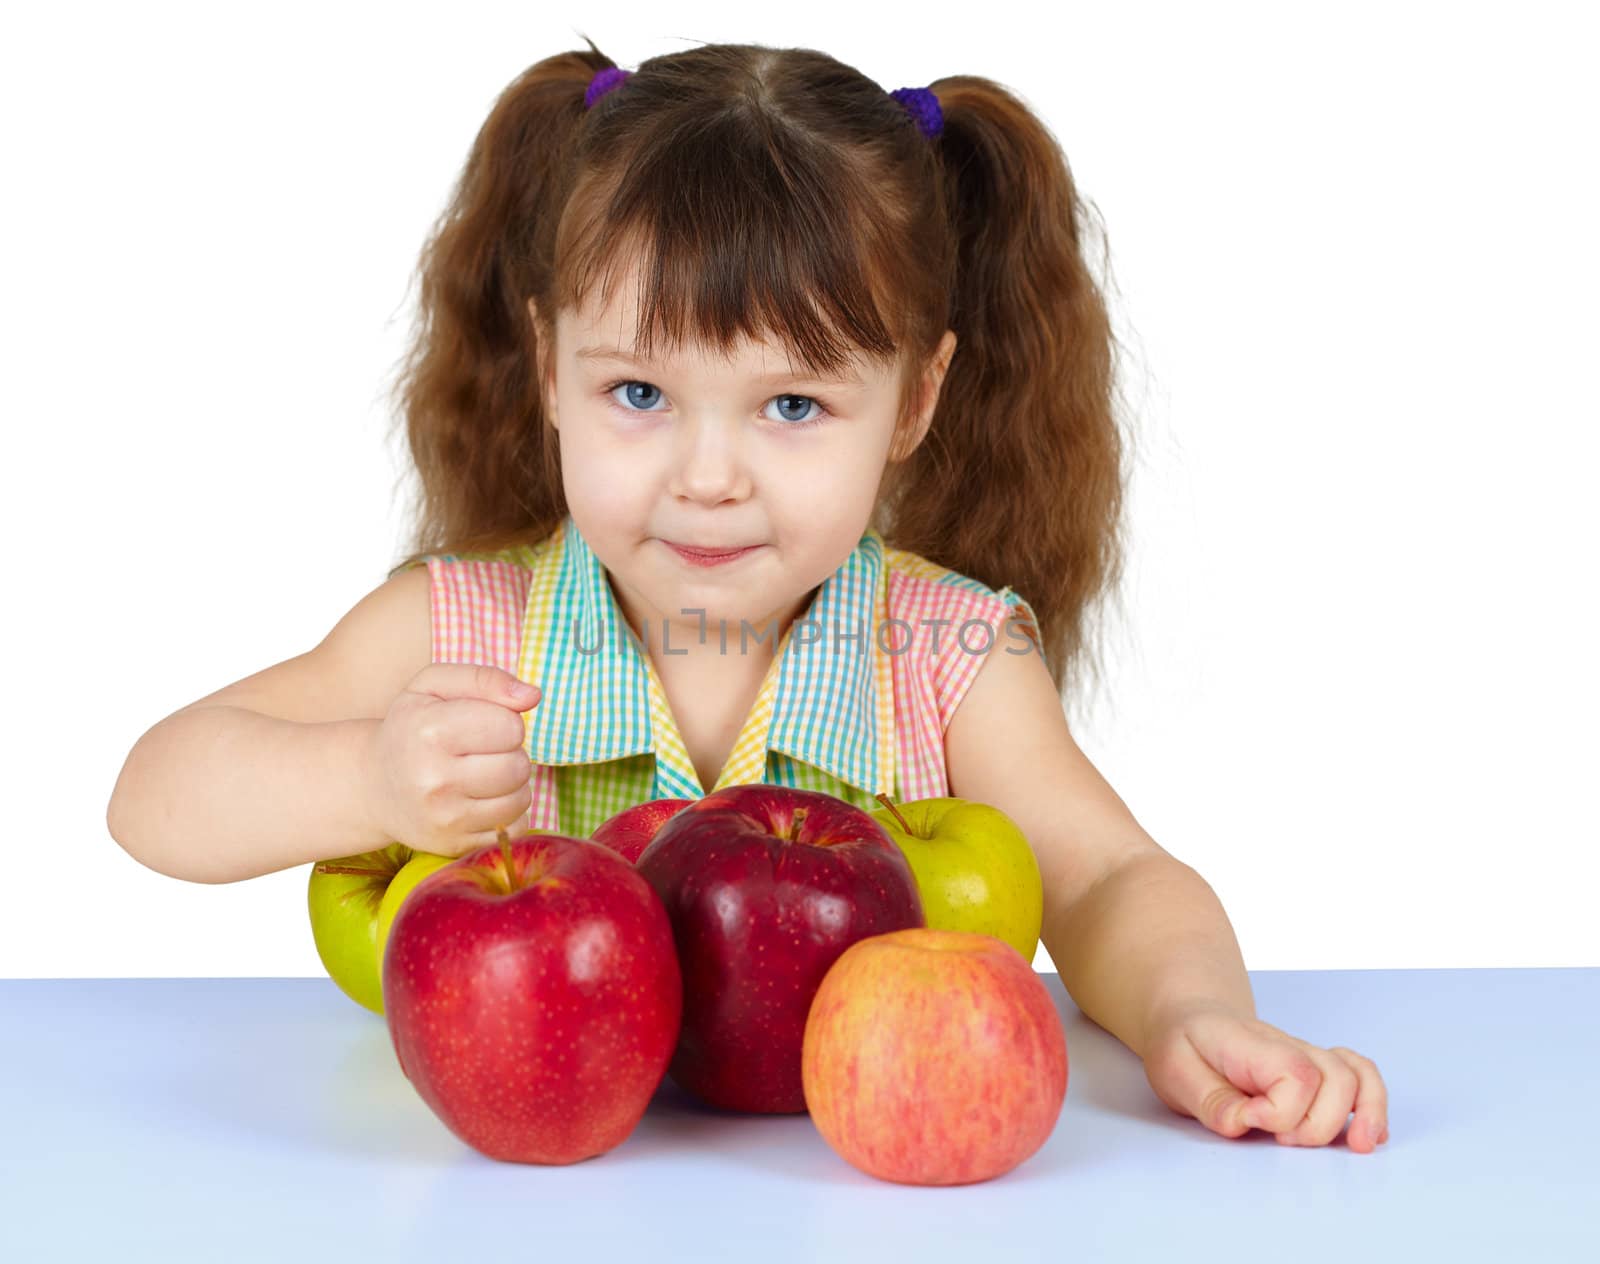 Girl playing with big ripe apples on white